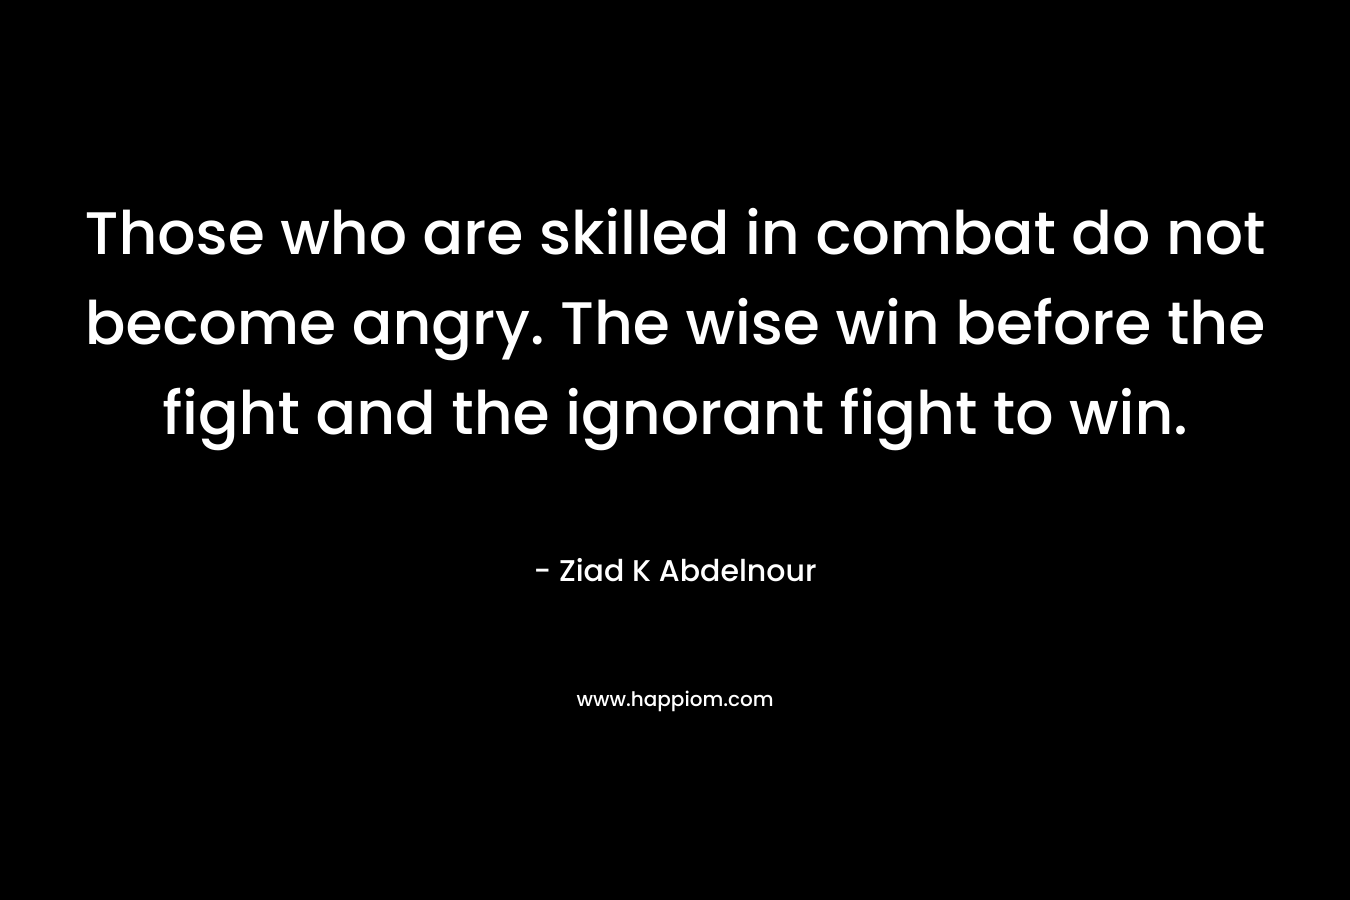 Those who are skilled in combat do not become angry. The wise win before the fight and the ignorant fight to win. – Ziad K Abdelnour